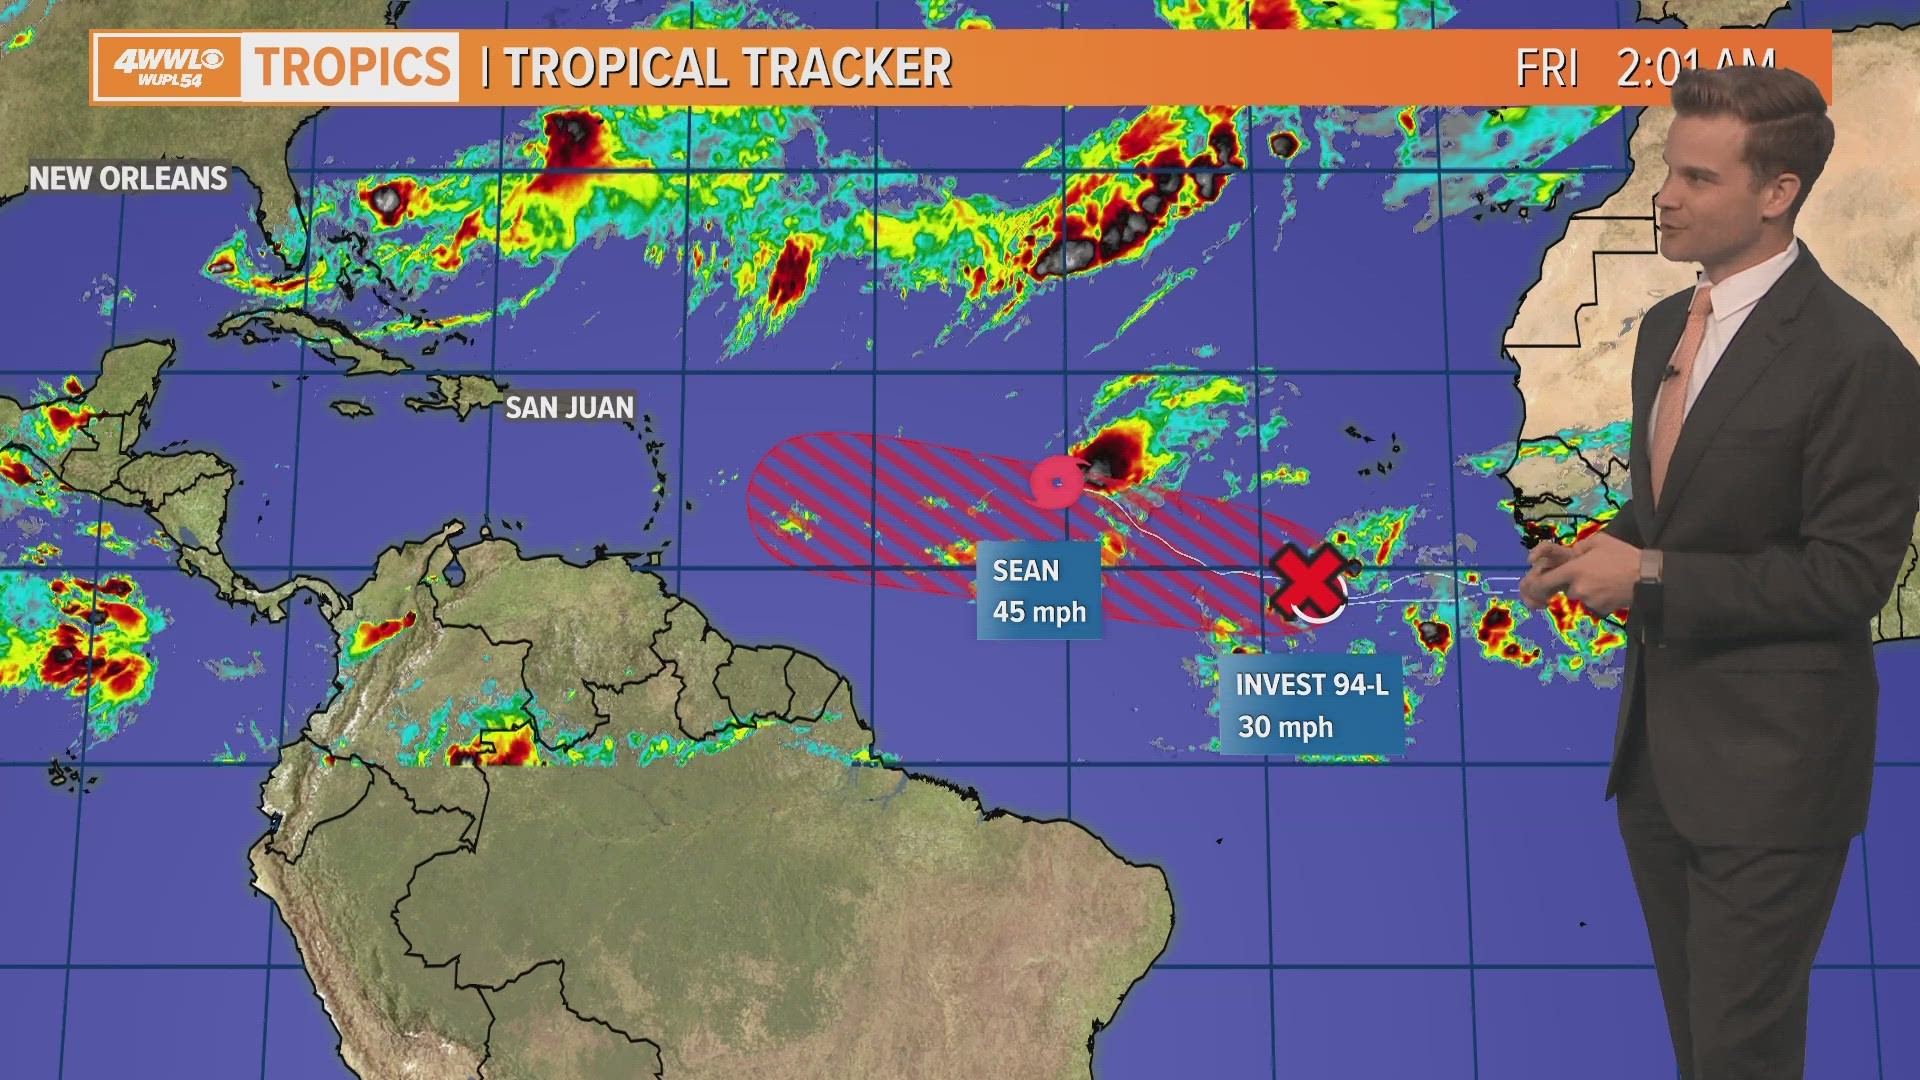 Meteorologist Payton Malone said it's unusual to have systems in the Atlantic at this time of year.